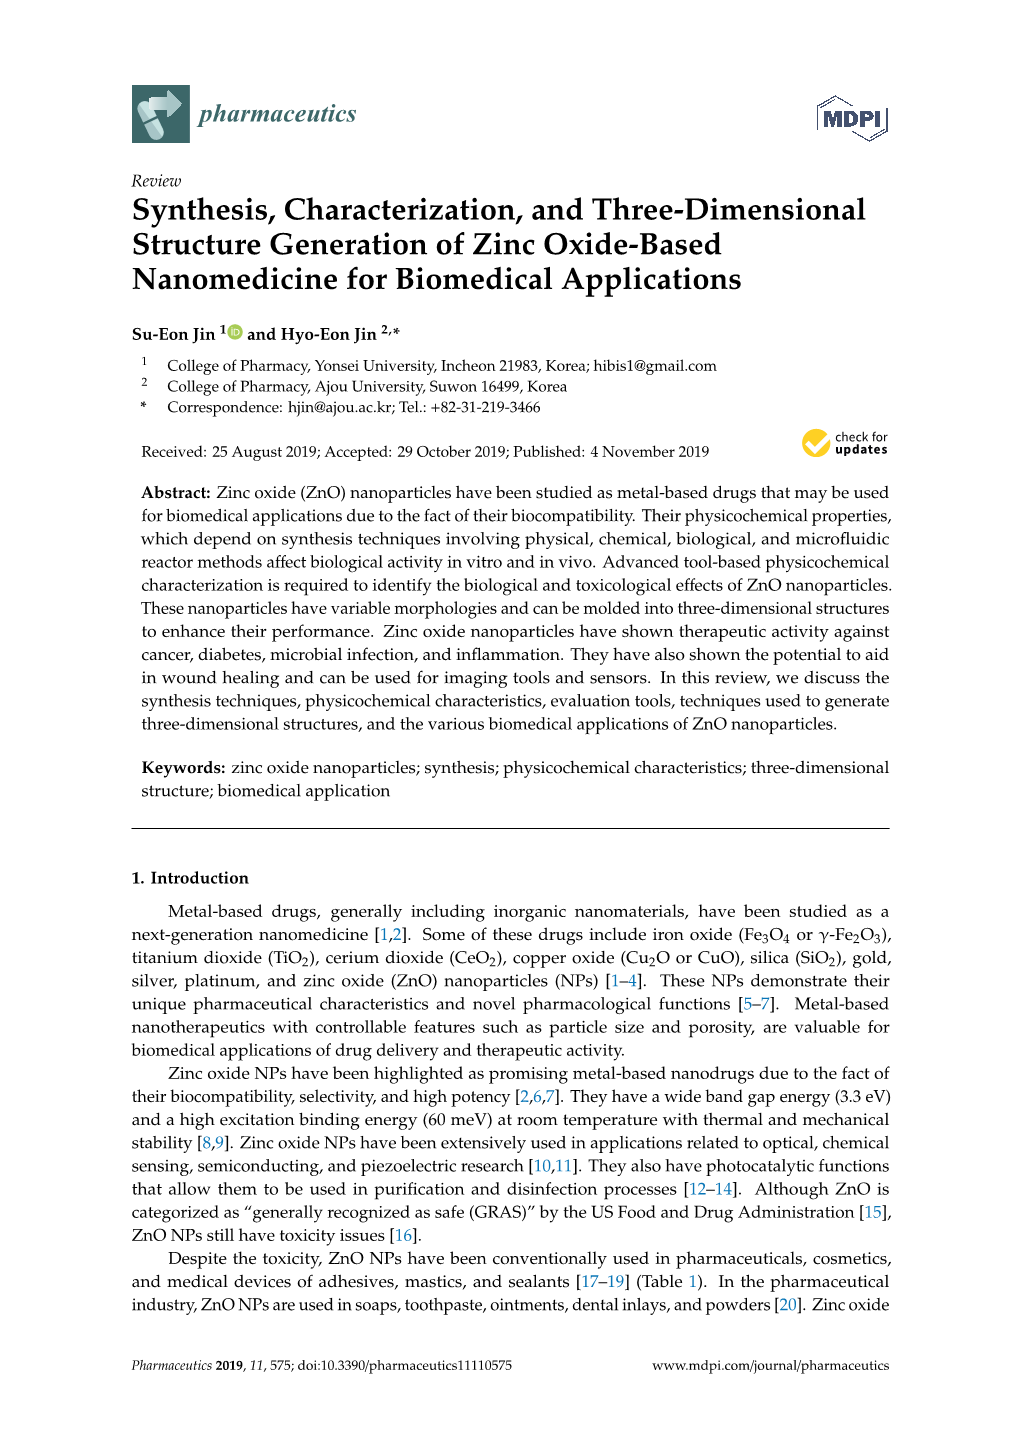 Synthesis, Characterization, and Three-Dimensional Structure Generation of Zinc Oxide-Based Nanomedicine for Biomedical Applications